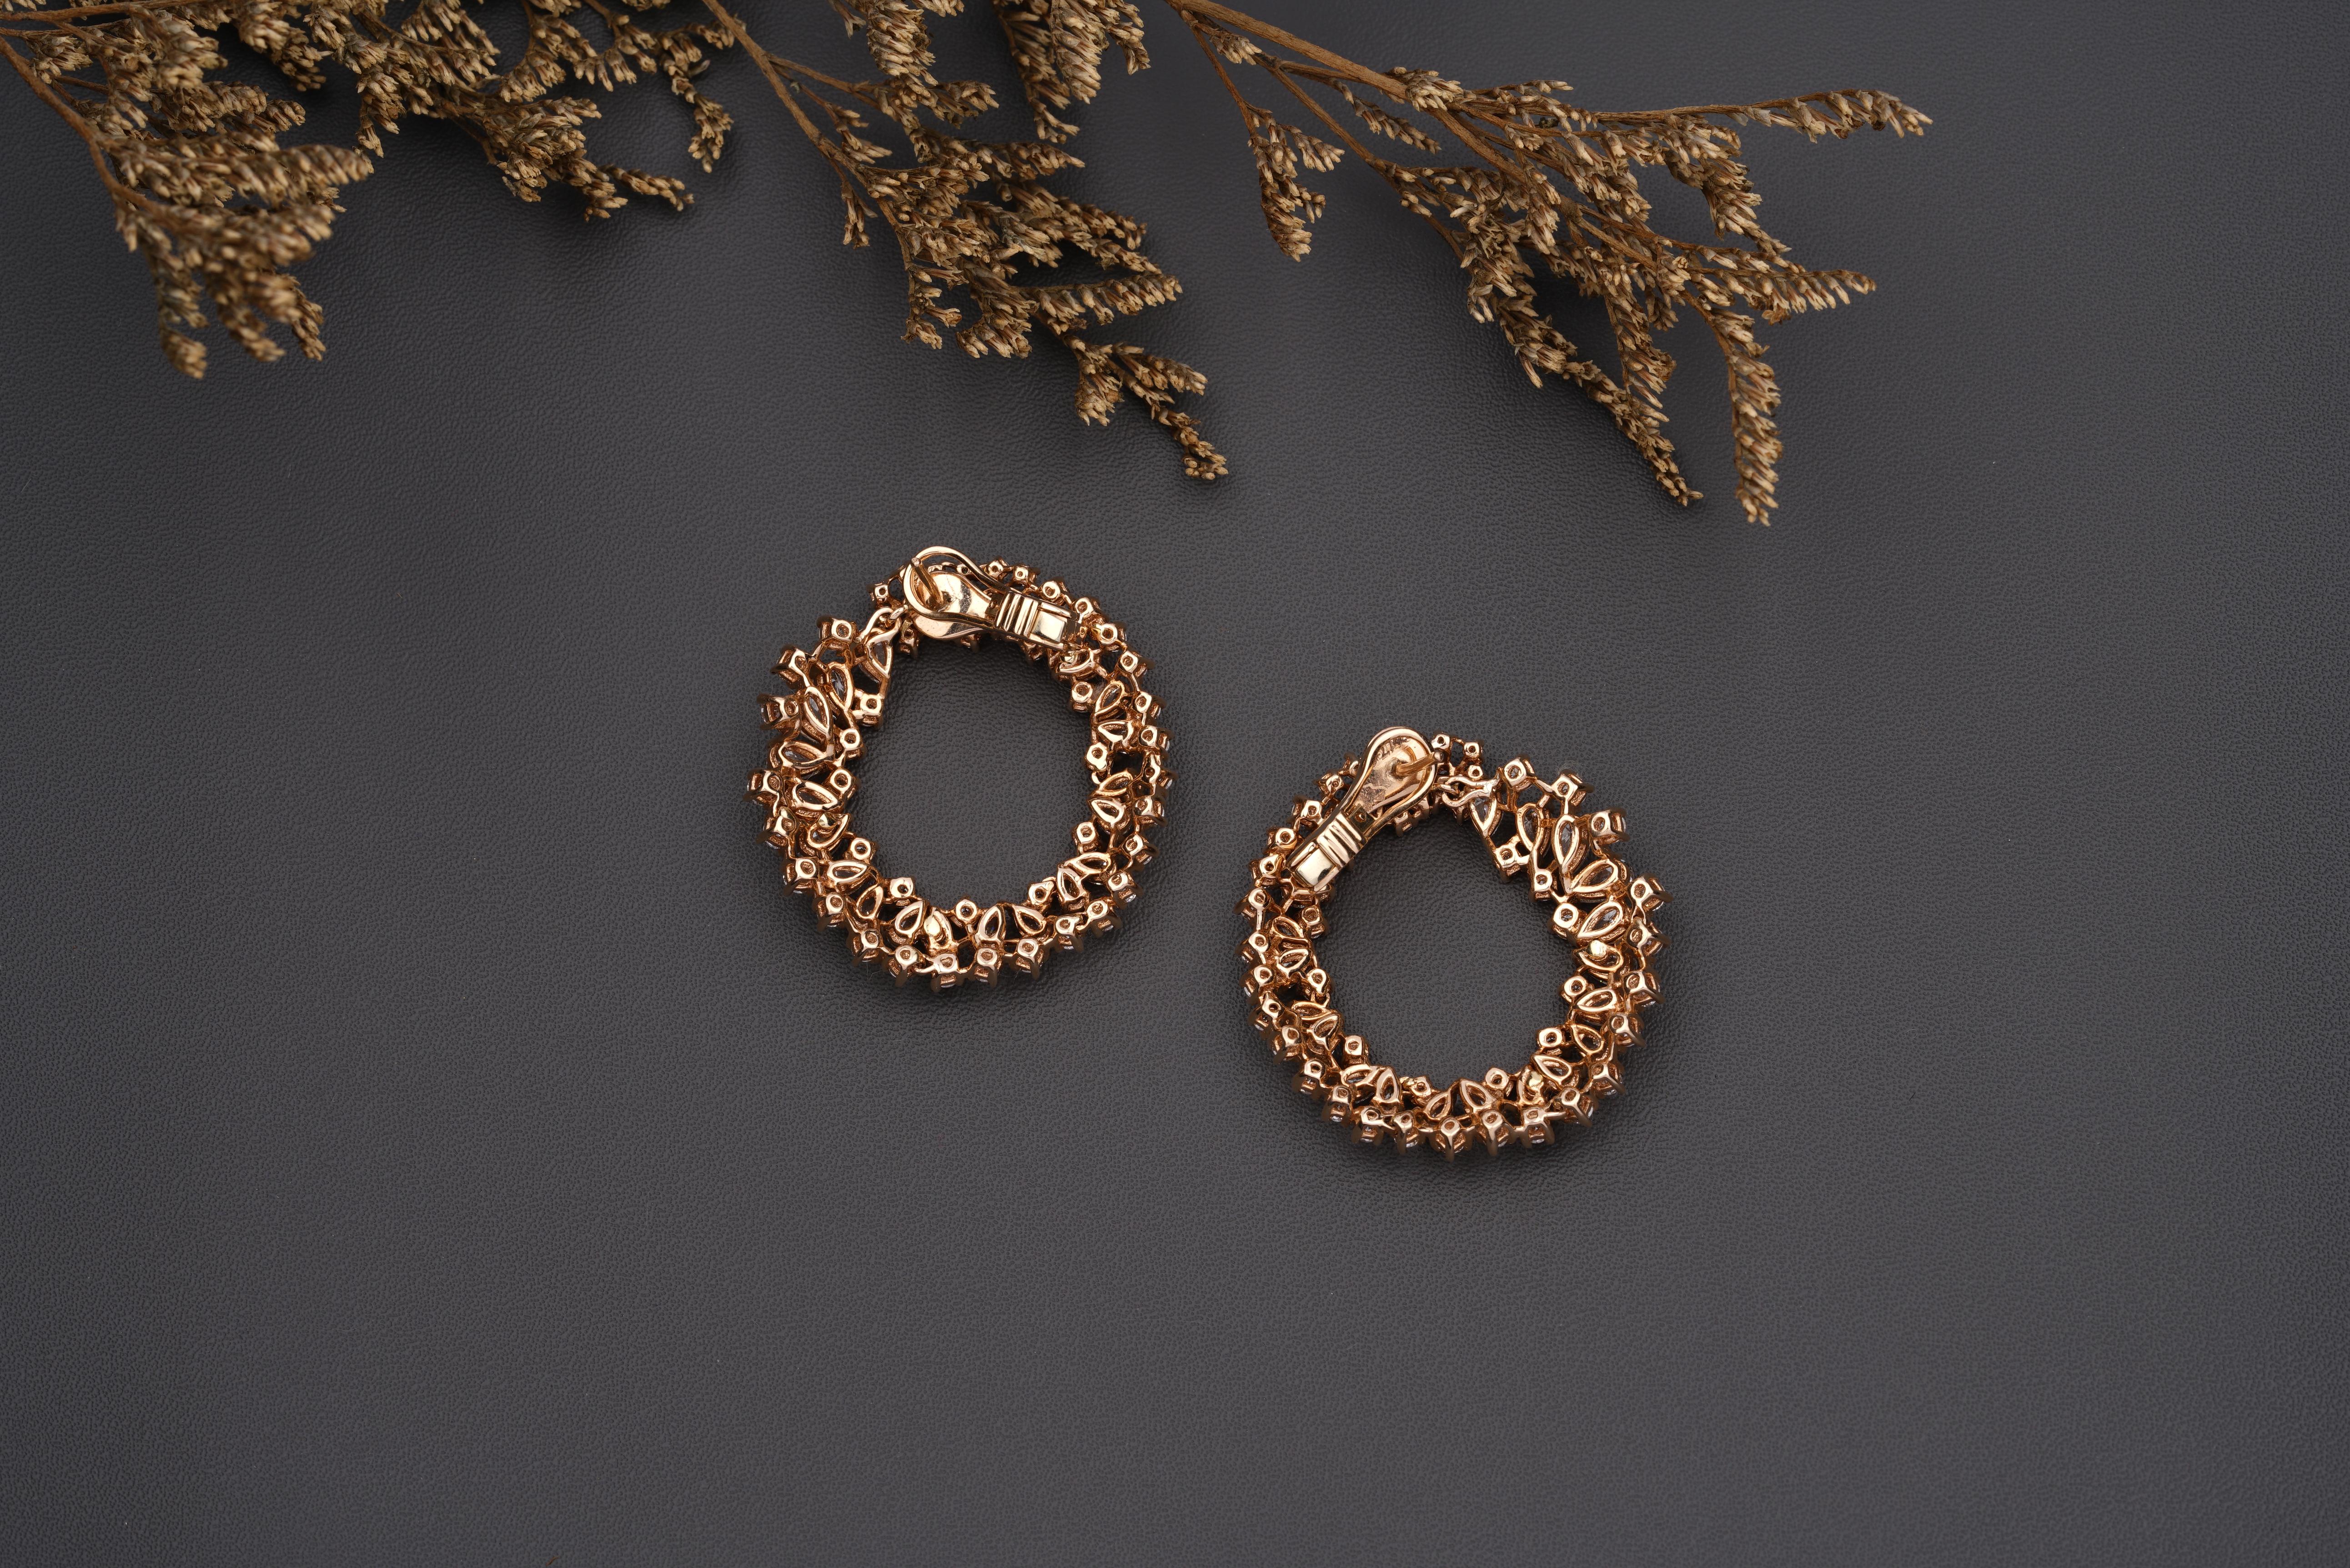 The Clustered Pear & Round Diamond Hoop Earrings are stylish and elegant pieces of jewelry made from 18K solid gold. The earrings feature a unique design with a cluster of pear-shaped and round diamonds that are set in gold hoops.

The pear-shaped